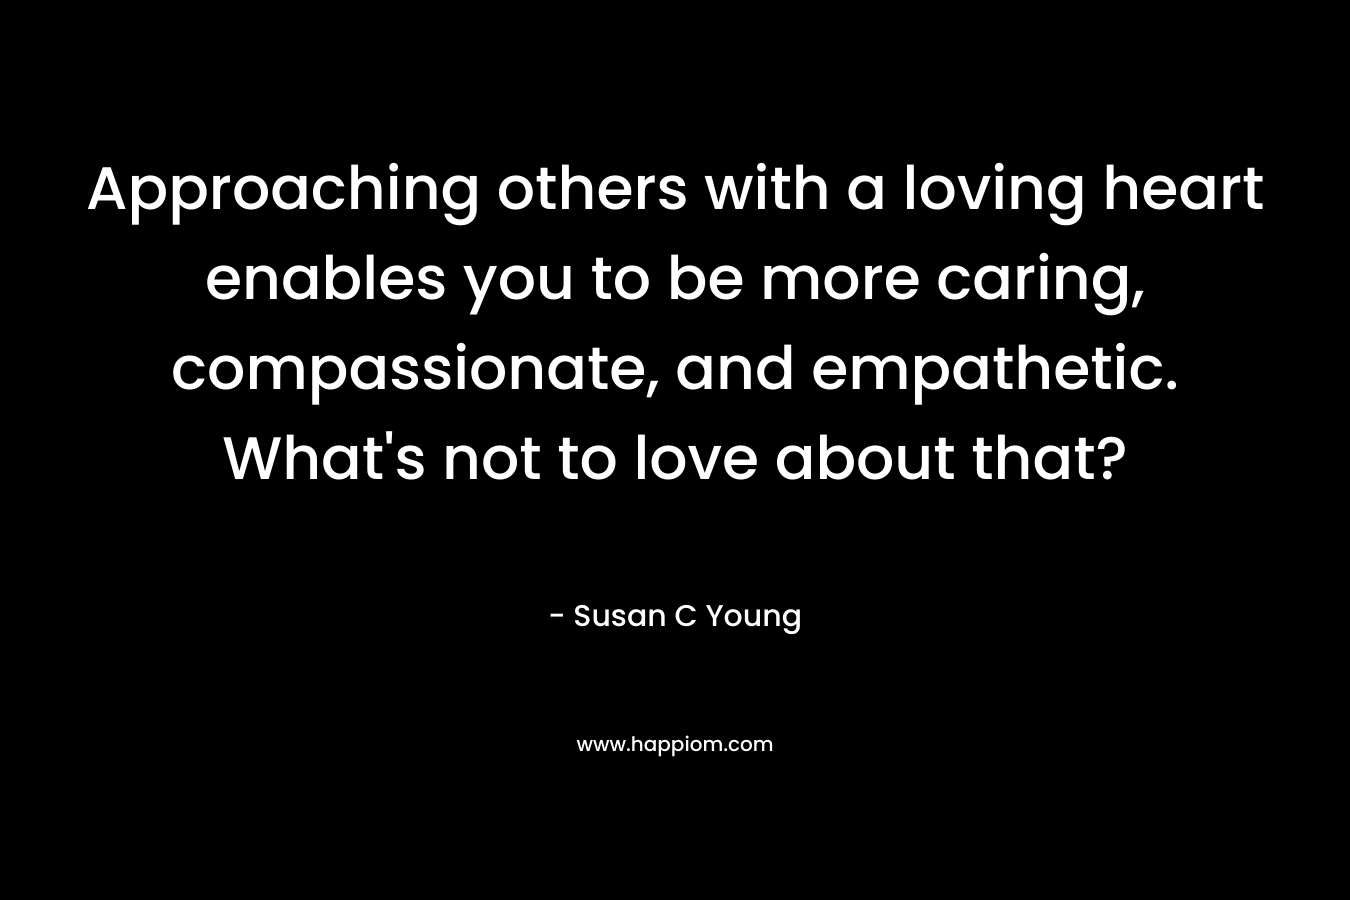 Approaching others with a loving heart enables you to be more caring, compassionate, and empathetic. What's not to love about that?